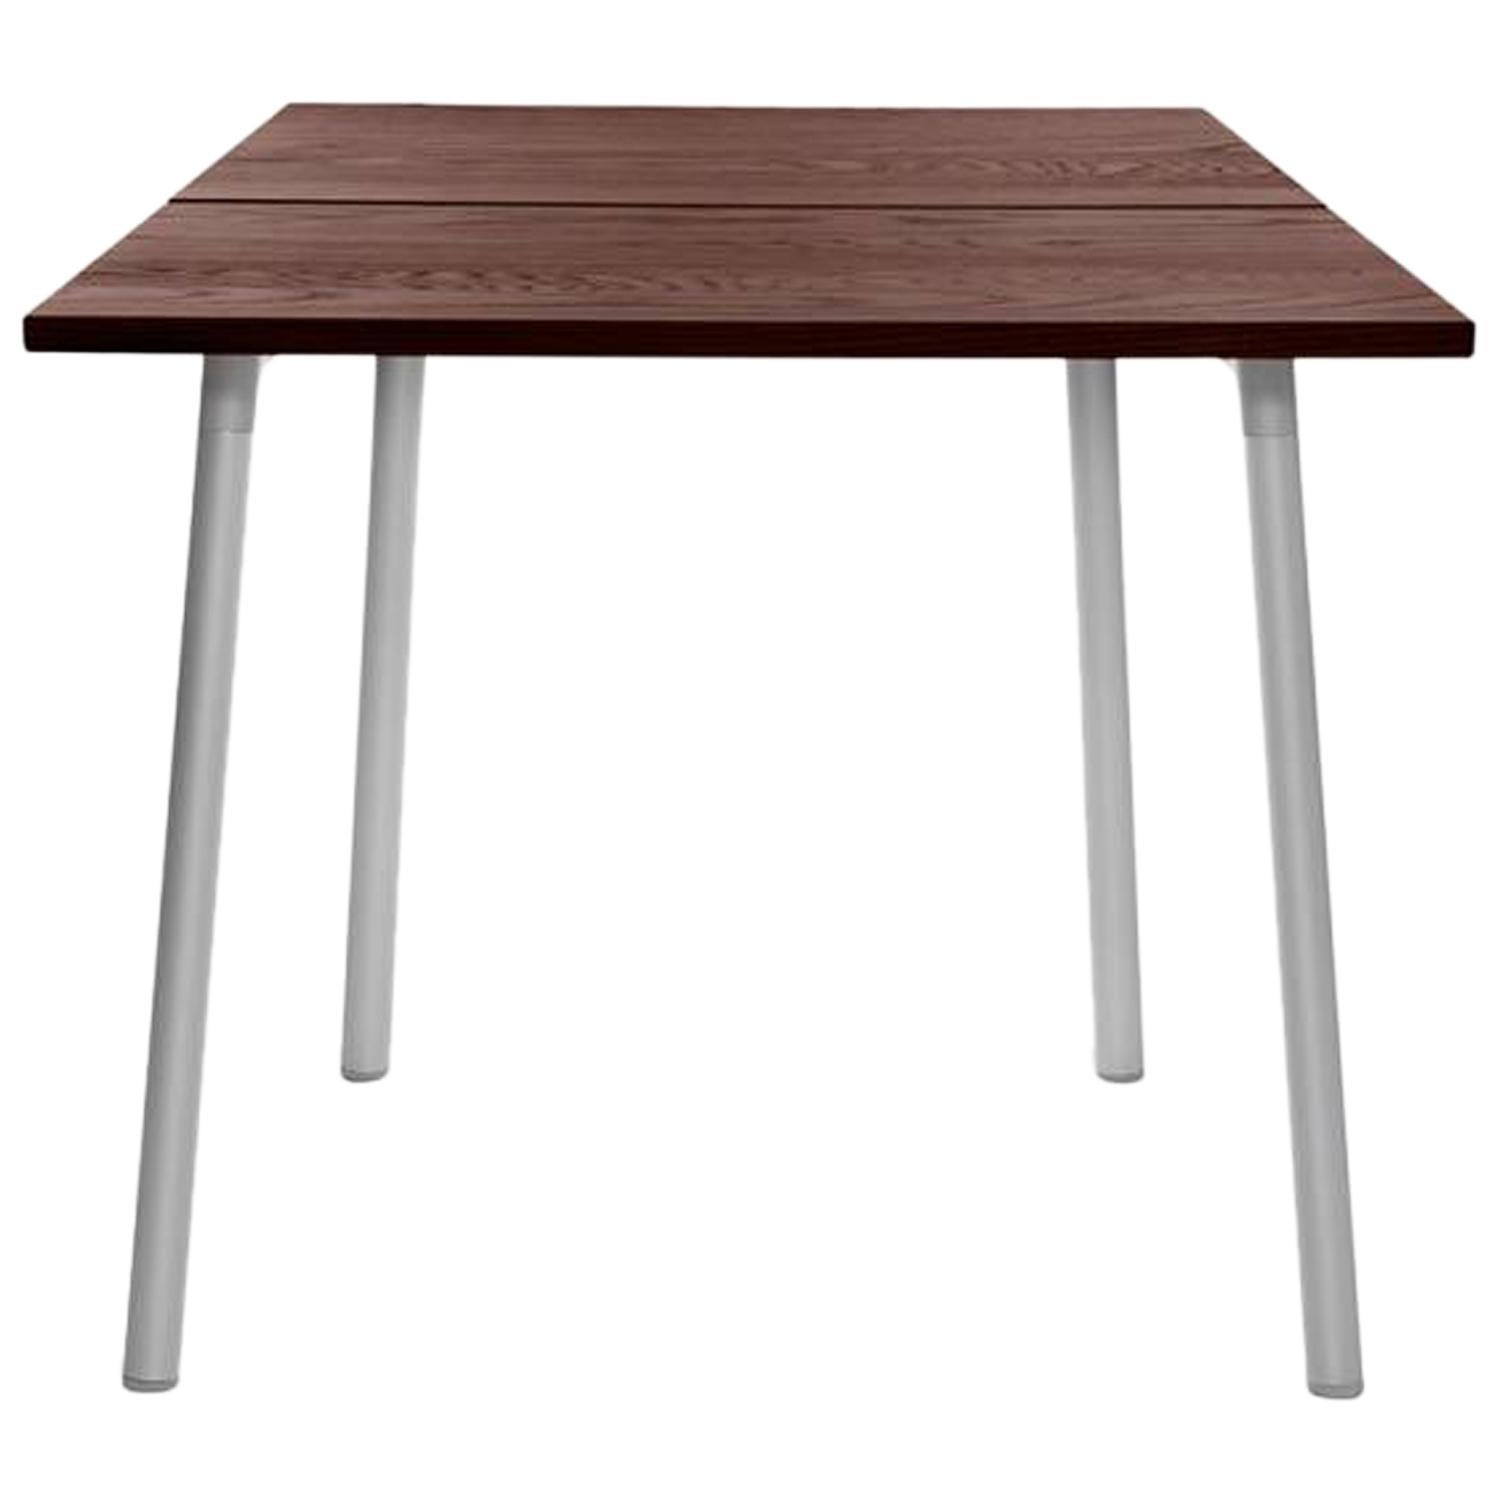 Emeco Run Small Table in Aluminum and Walnut by Sam Hecht & Kim Colin